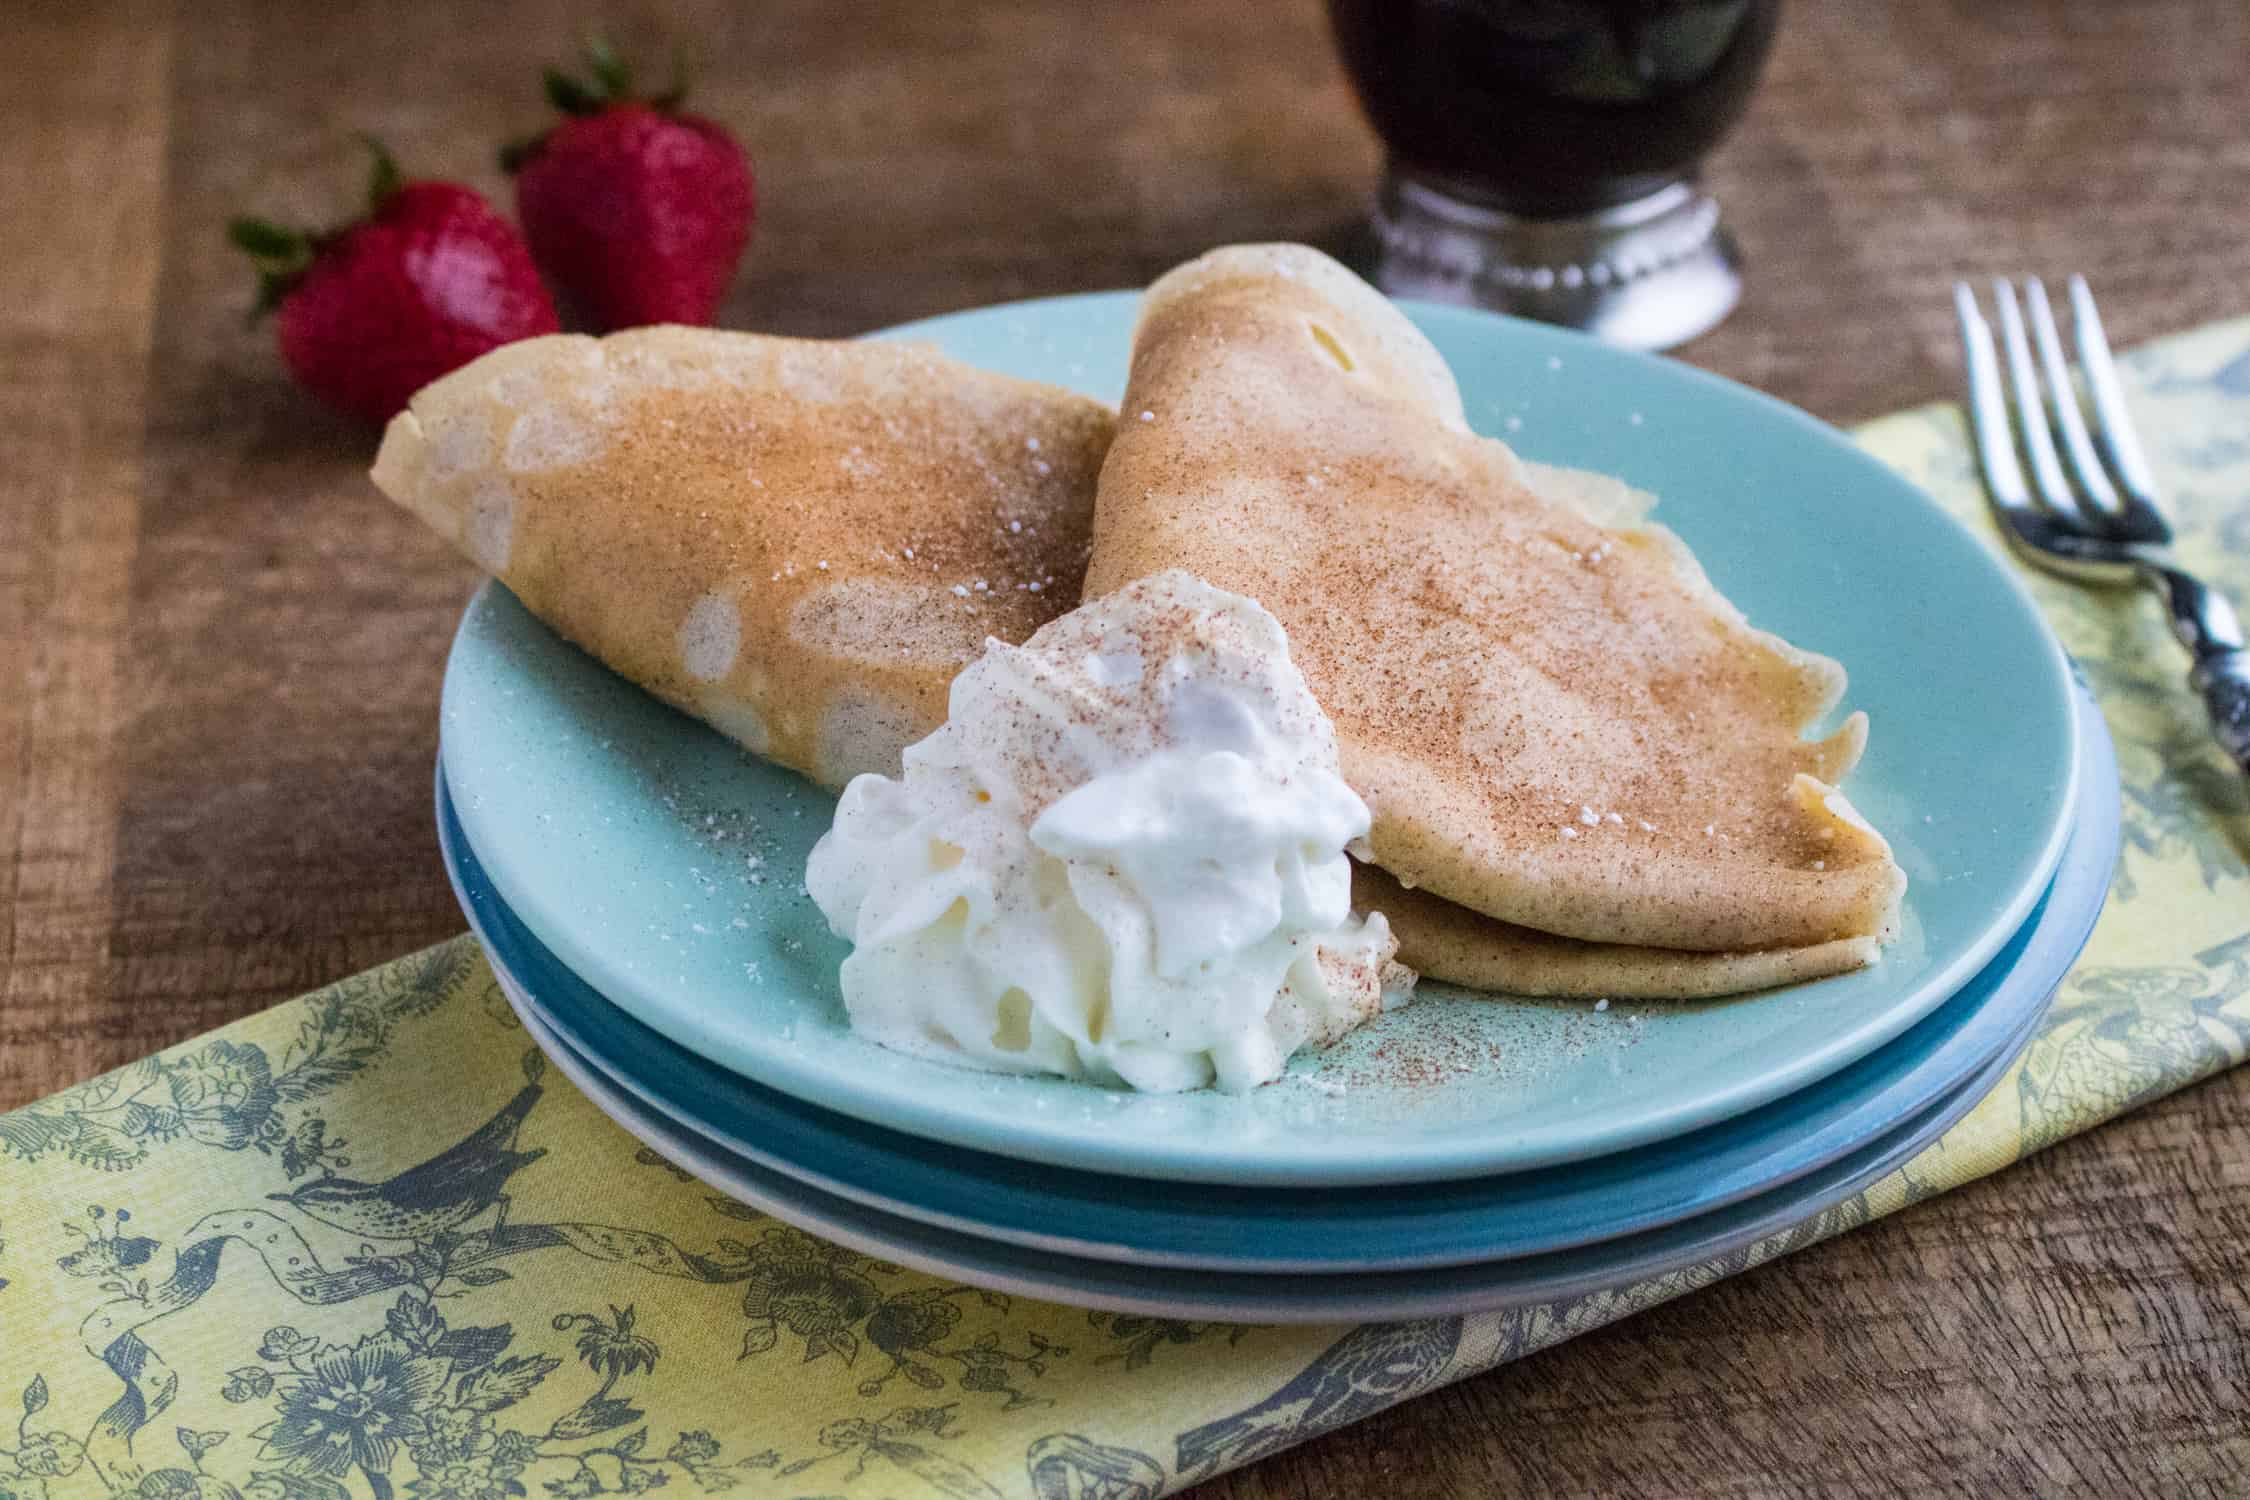 Completed snickerdoodle crepes recipe shows two crepes with whipped cream served on a stack of blue plates sitting on a yellow and blue toile print fabric, along side two strawberries, a clear glass pitcher of maple syrup, and a silver spoon.